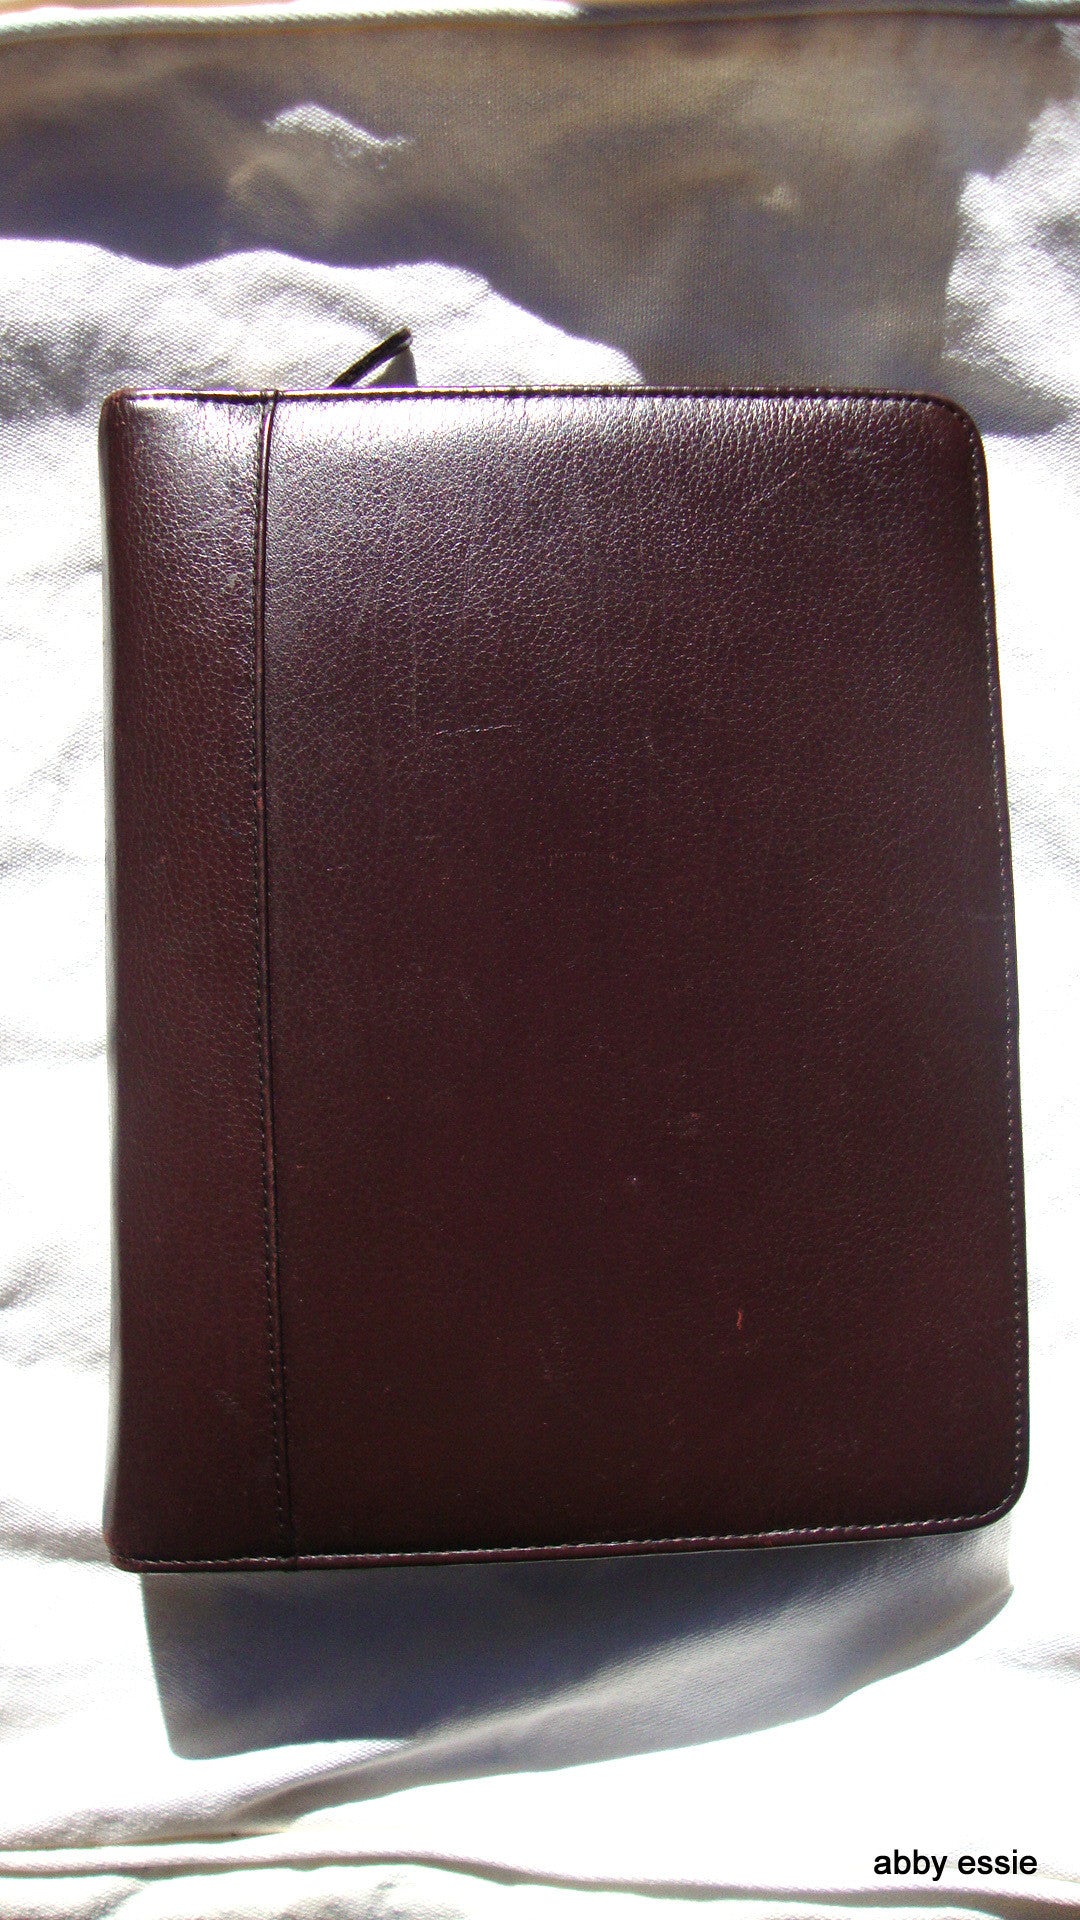 [SOLD] FRANKLIN COVEY PLANNER  BROWN LEATHER WITH ADDRESS DREAM MANAGEMENT PLANNER GUID